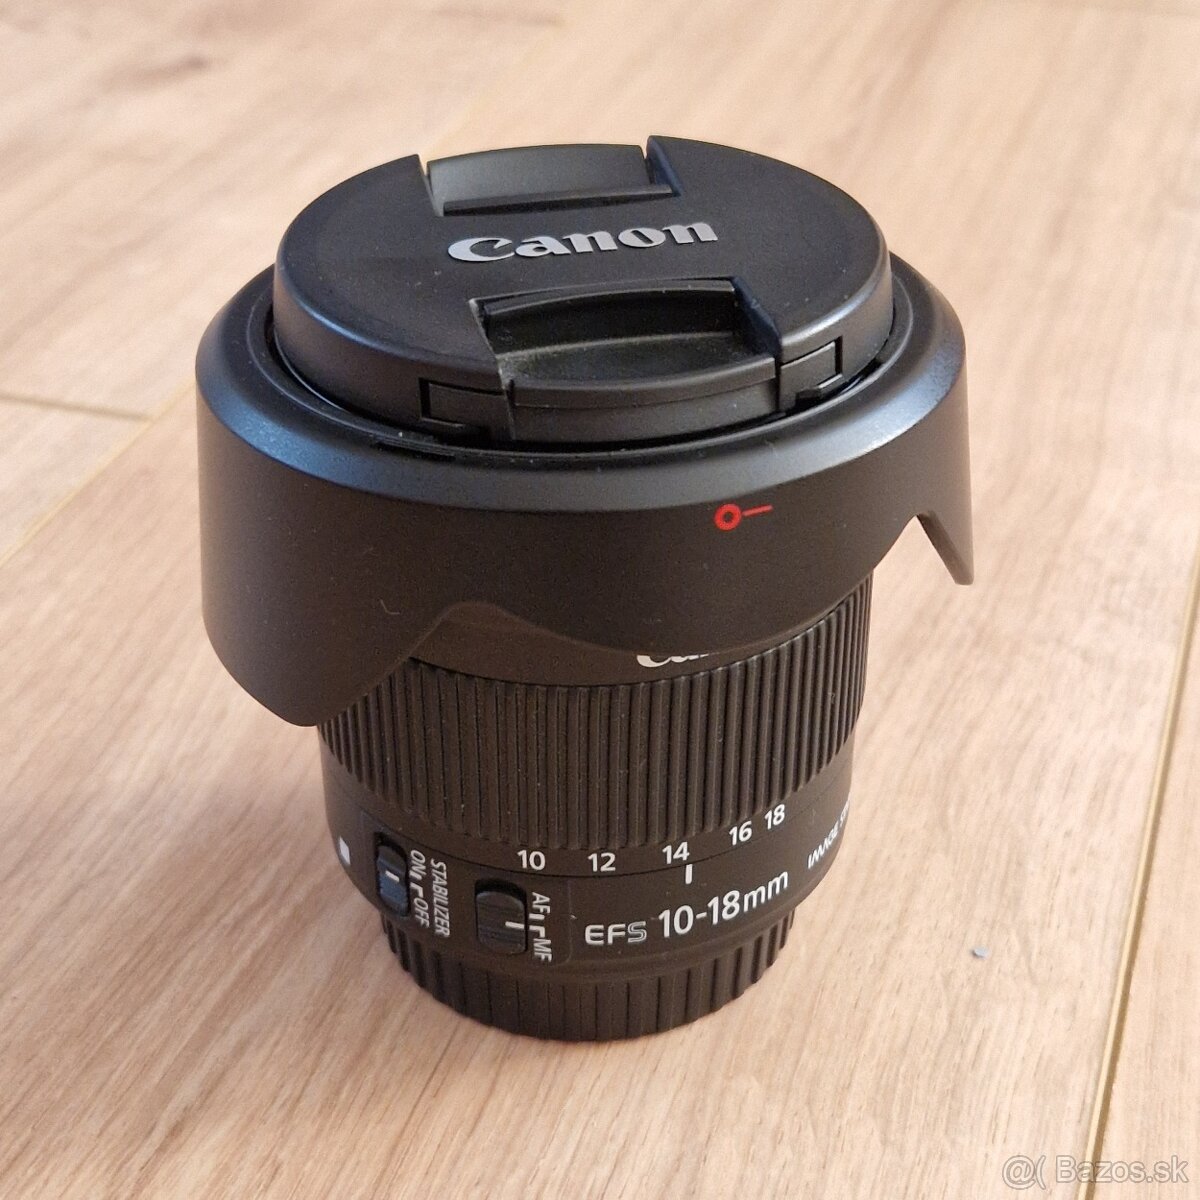 Canon ef-s 10-18mm